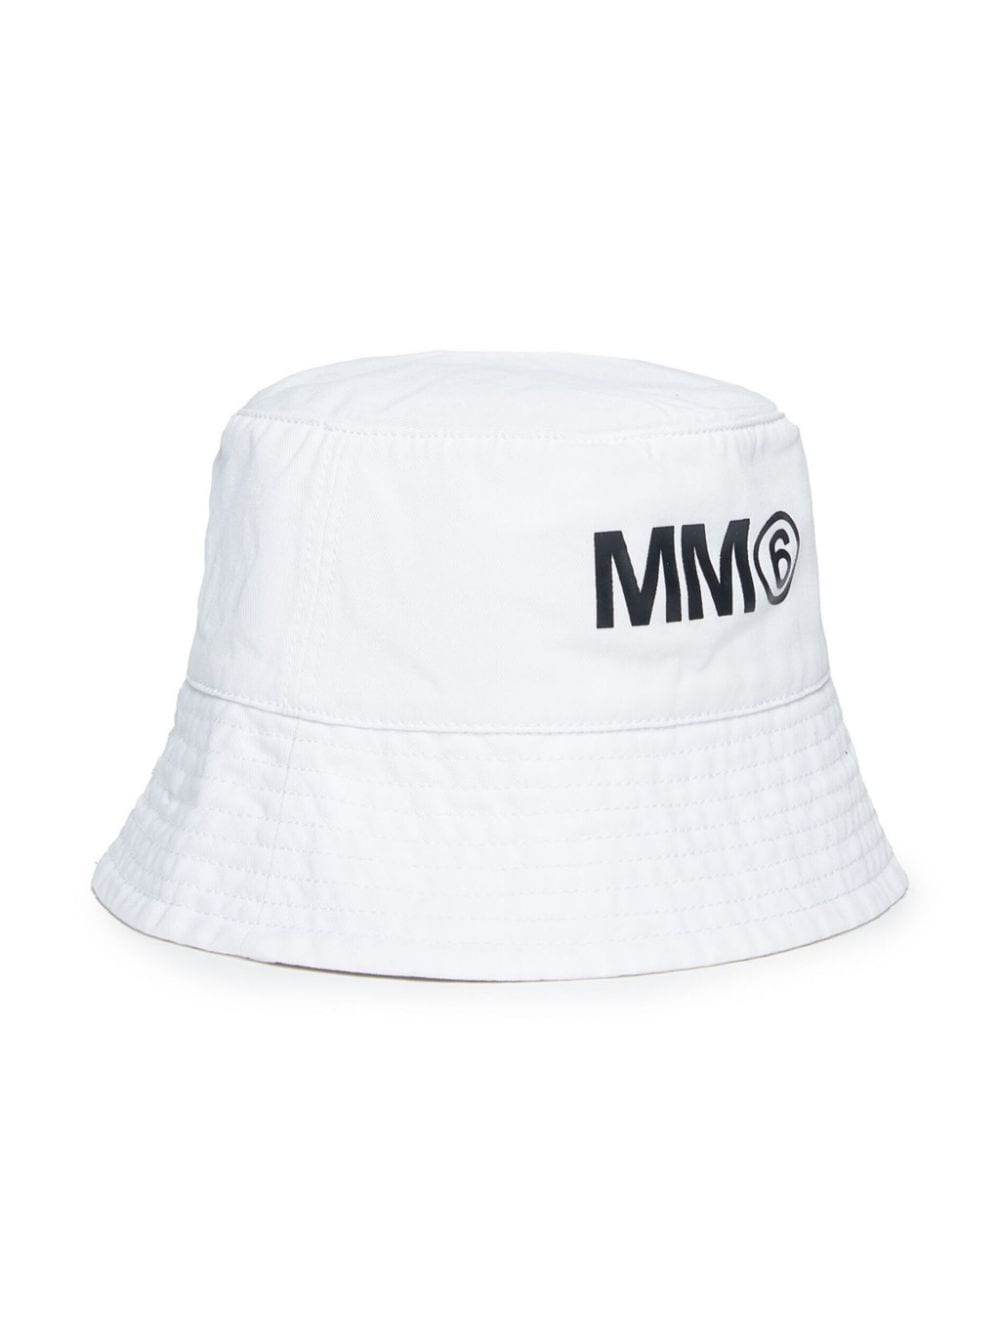 White hat for girls with logo